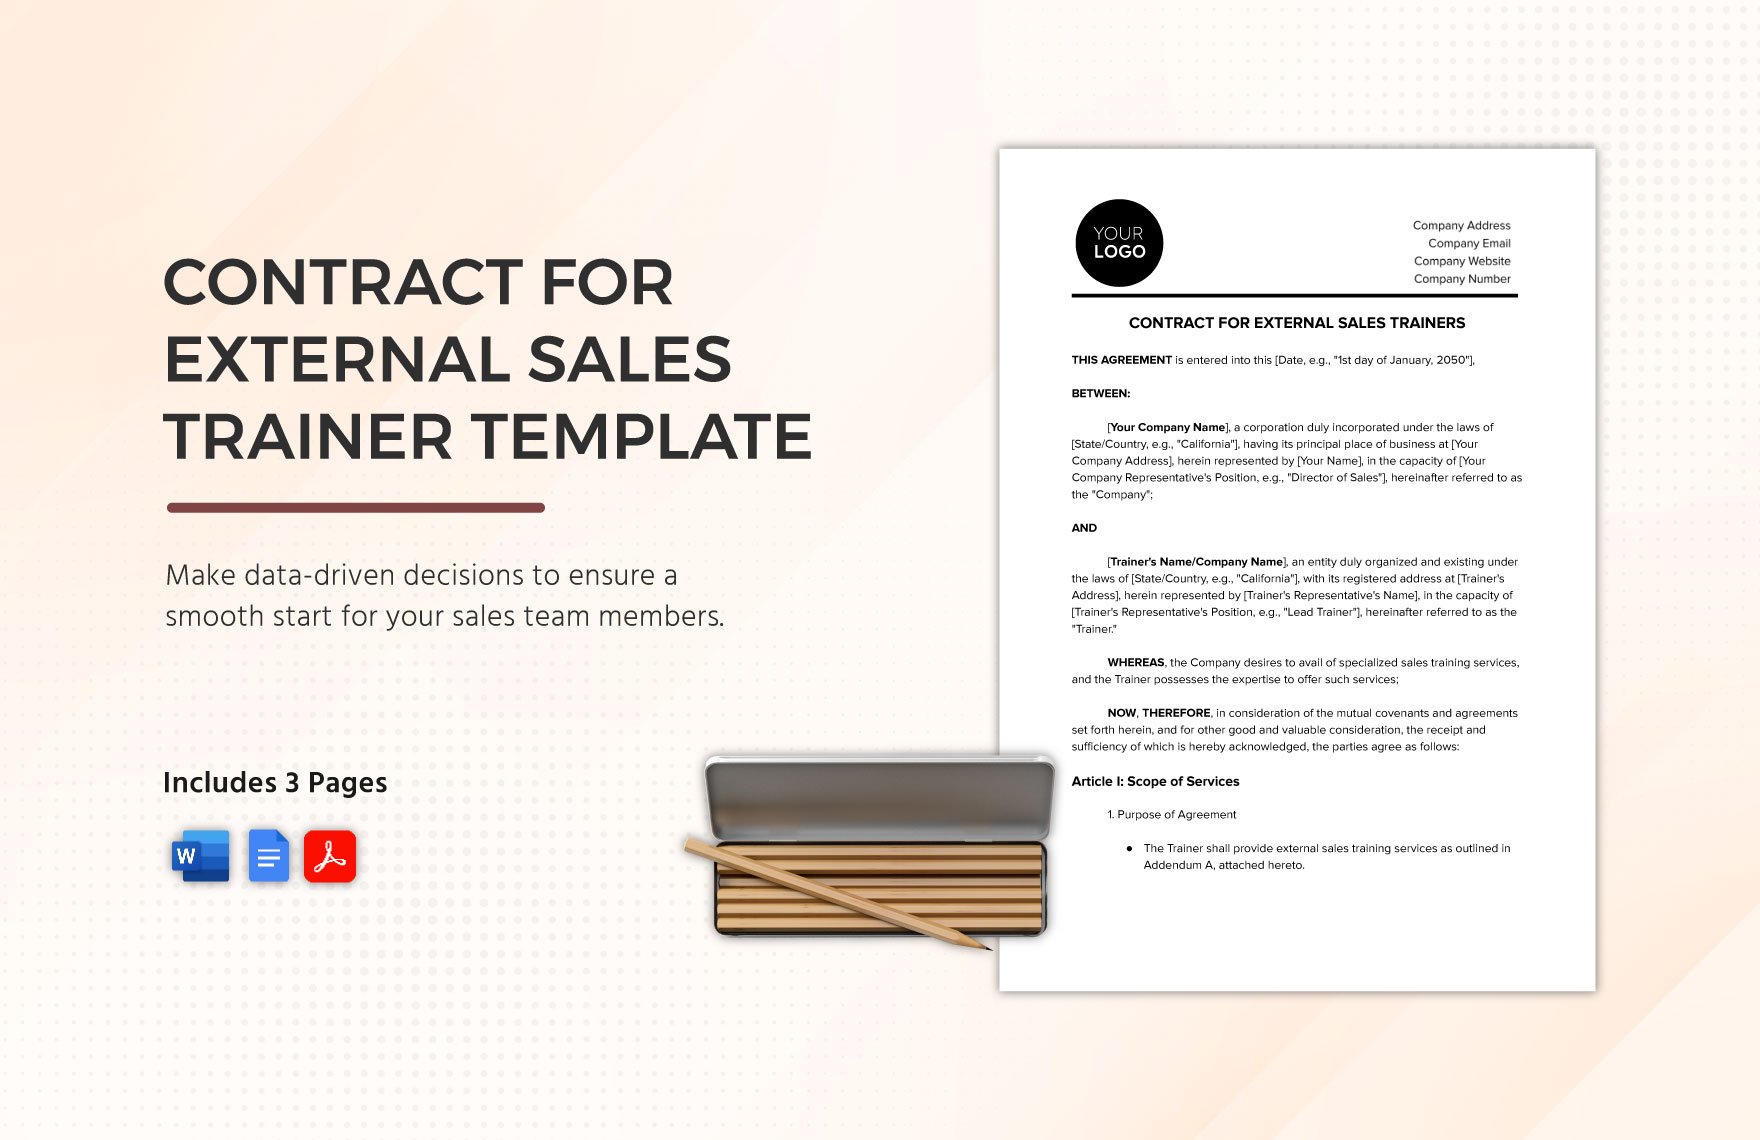 Contract for External Sales Trainers Template